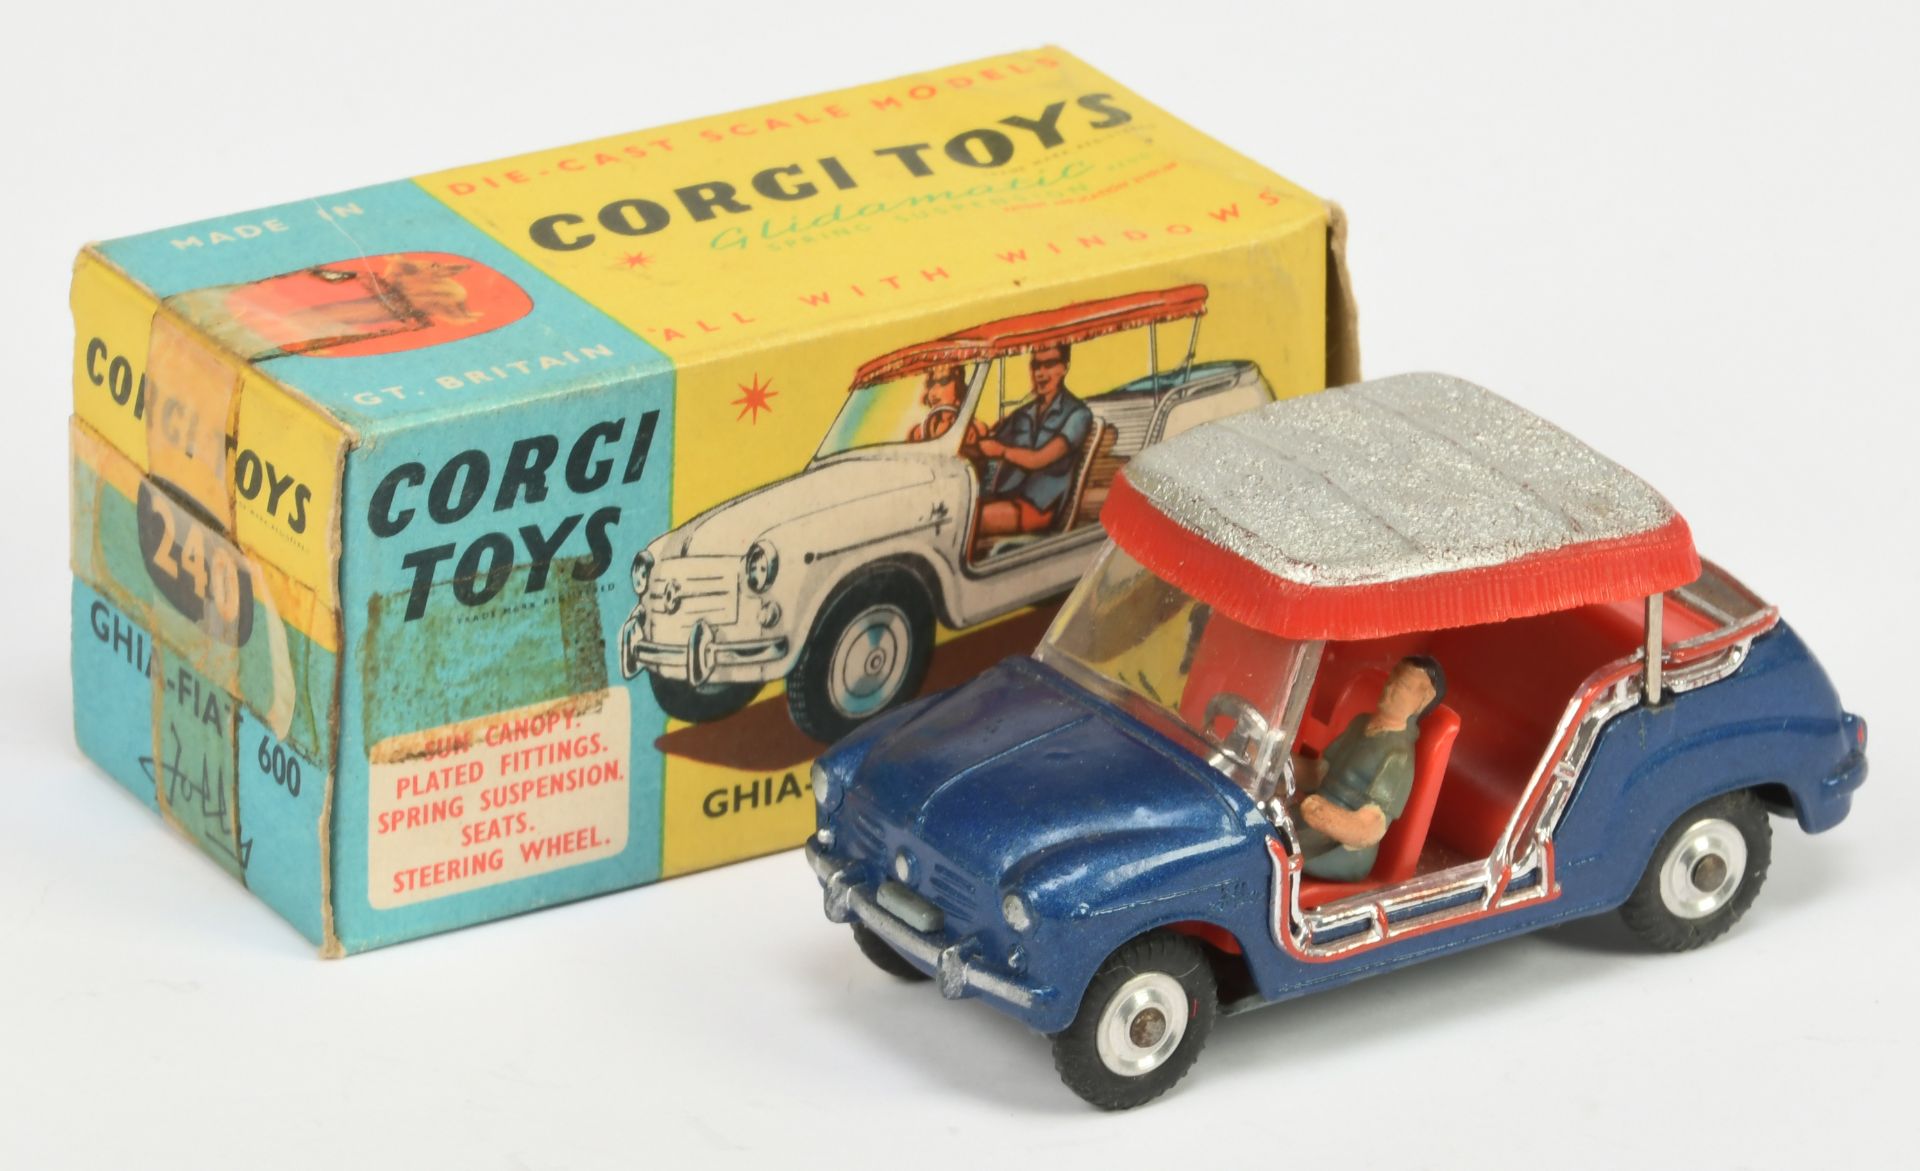 Corgi Toys  240 Ghia-Fiat 500 Jolly - dark blue body, red interior with figures, silver and red p...